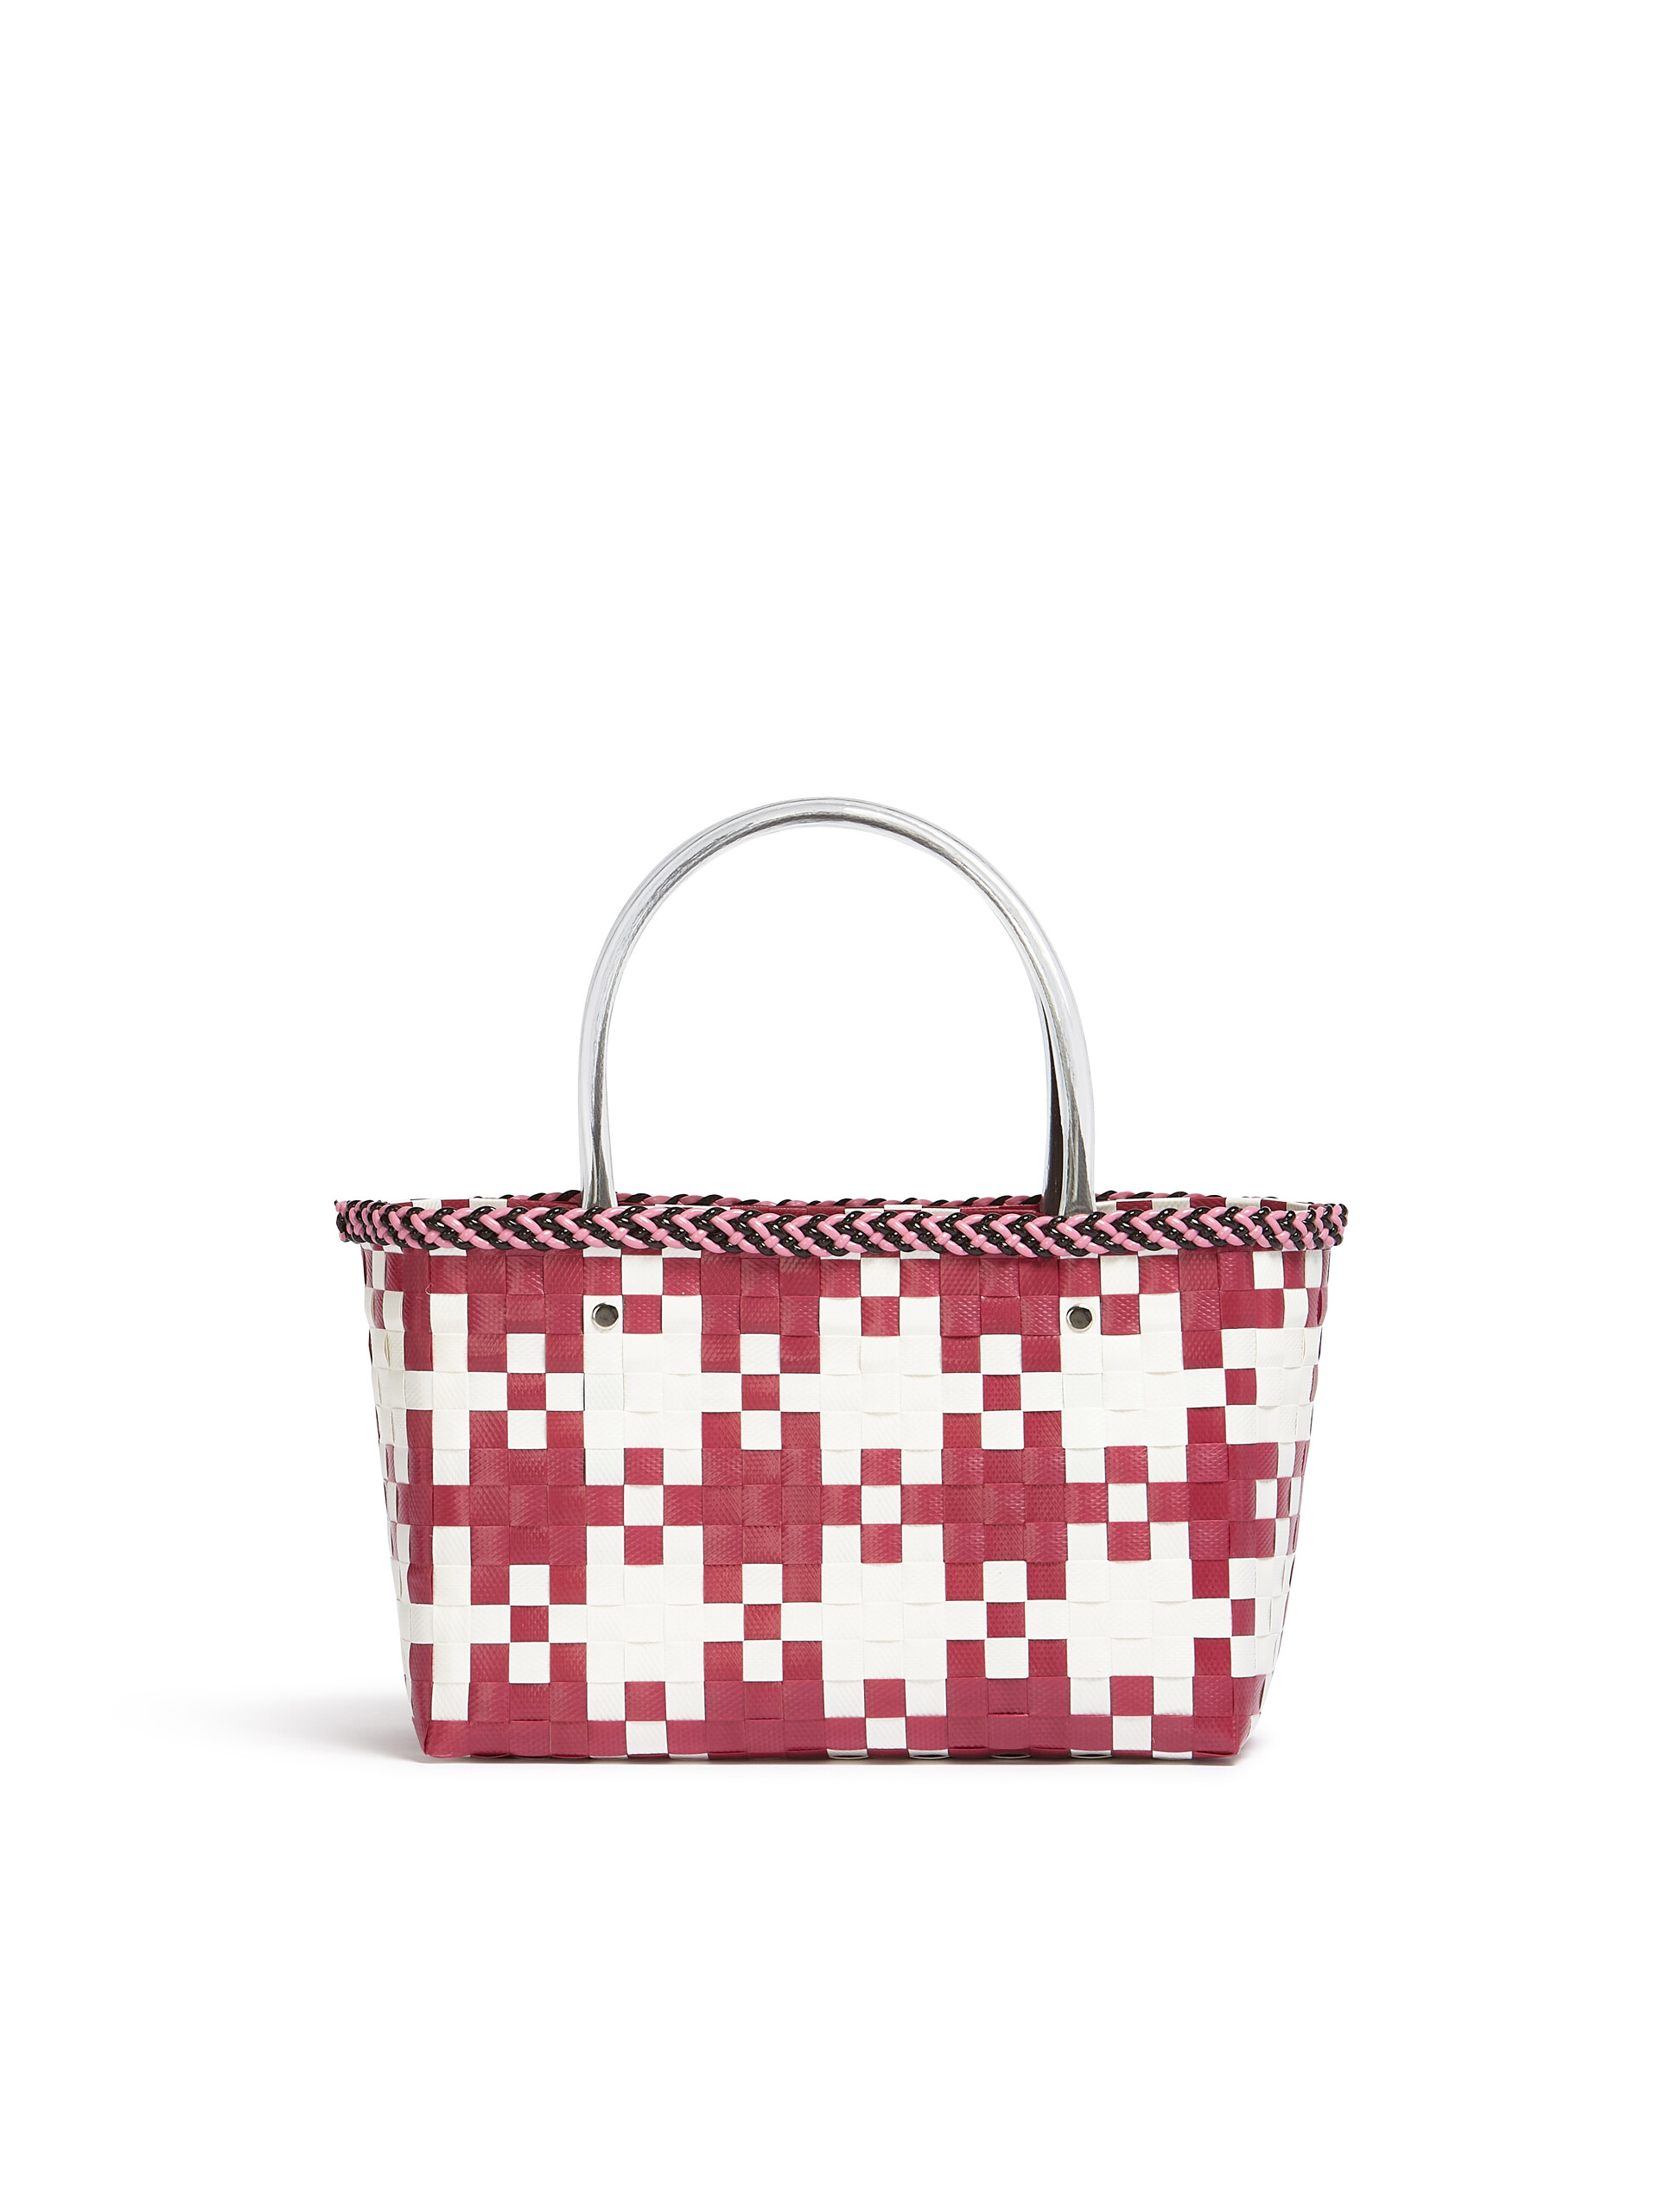 MARNI MARKET CHECK BAG in red and white tartan woven material - Shopping Bags - Image 3